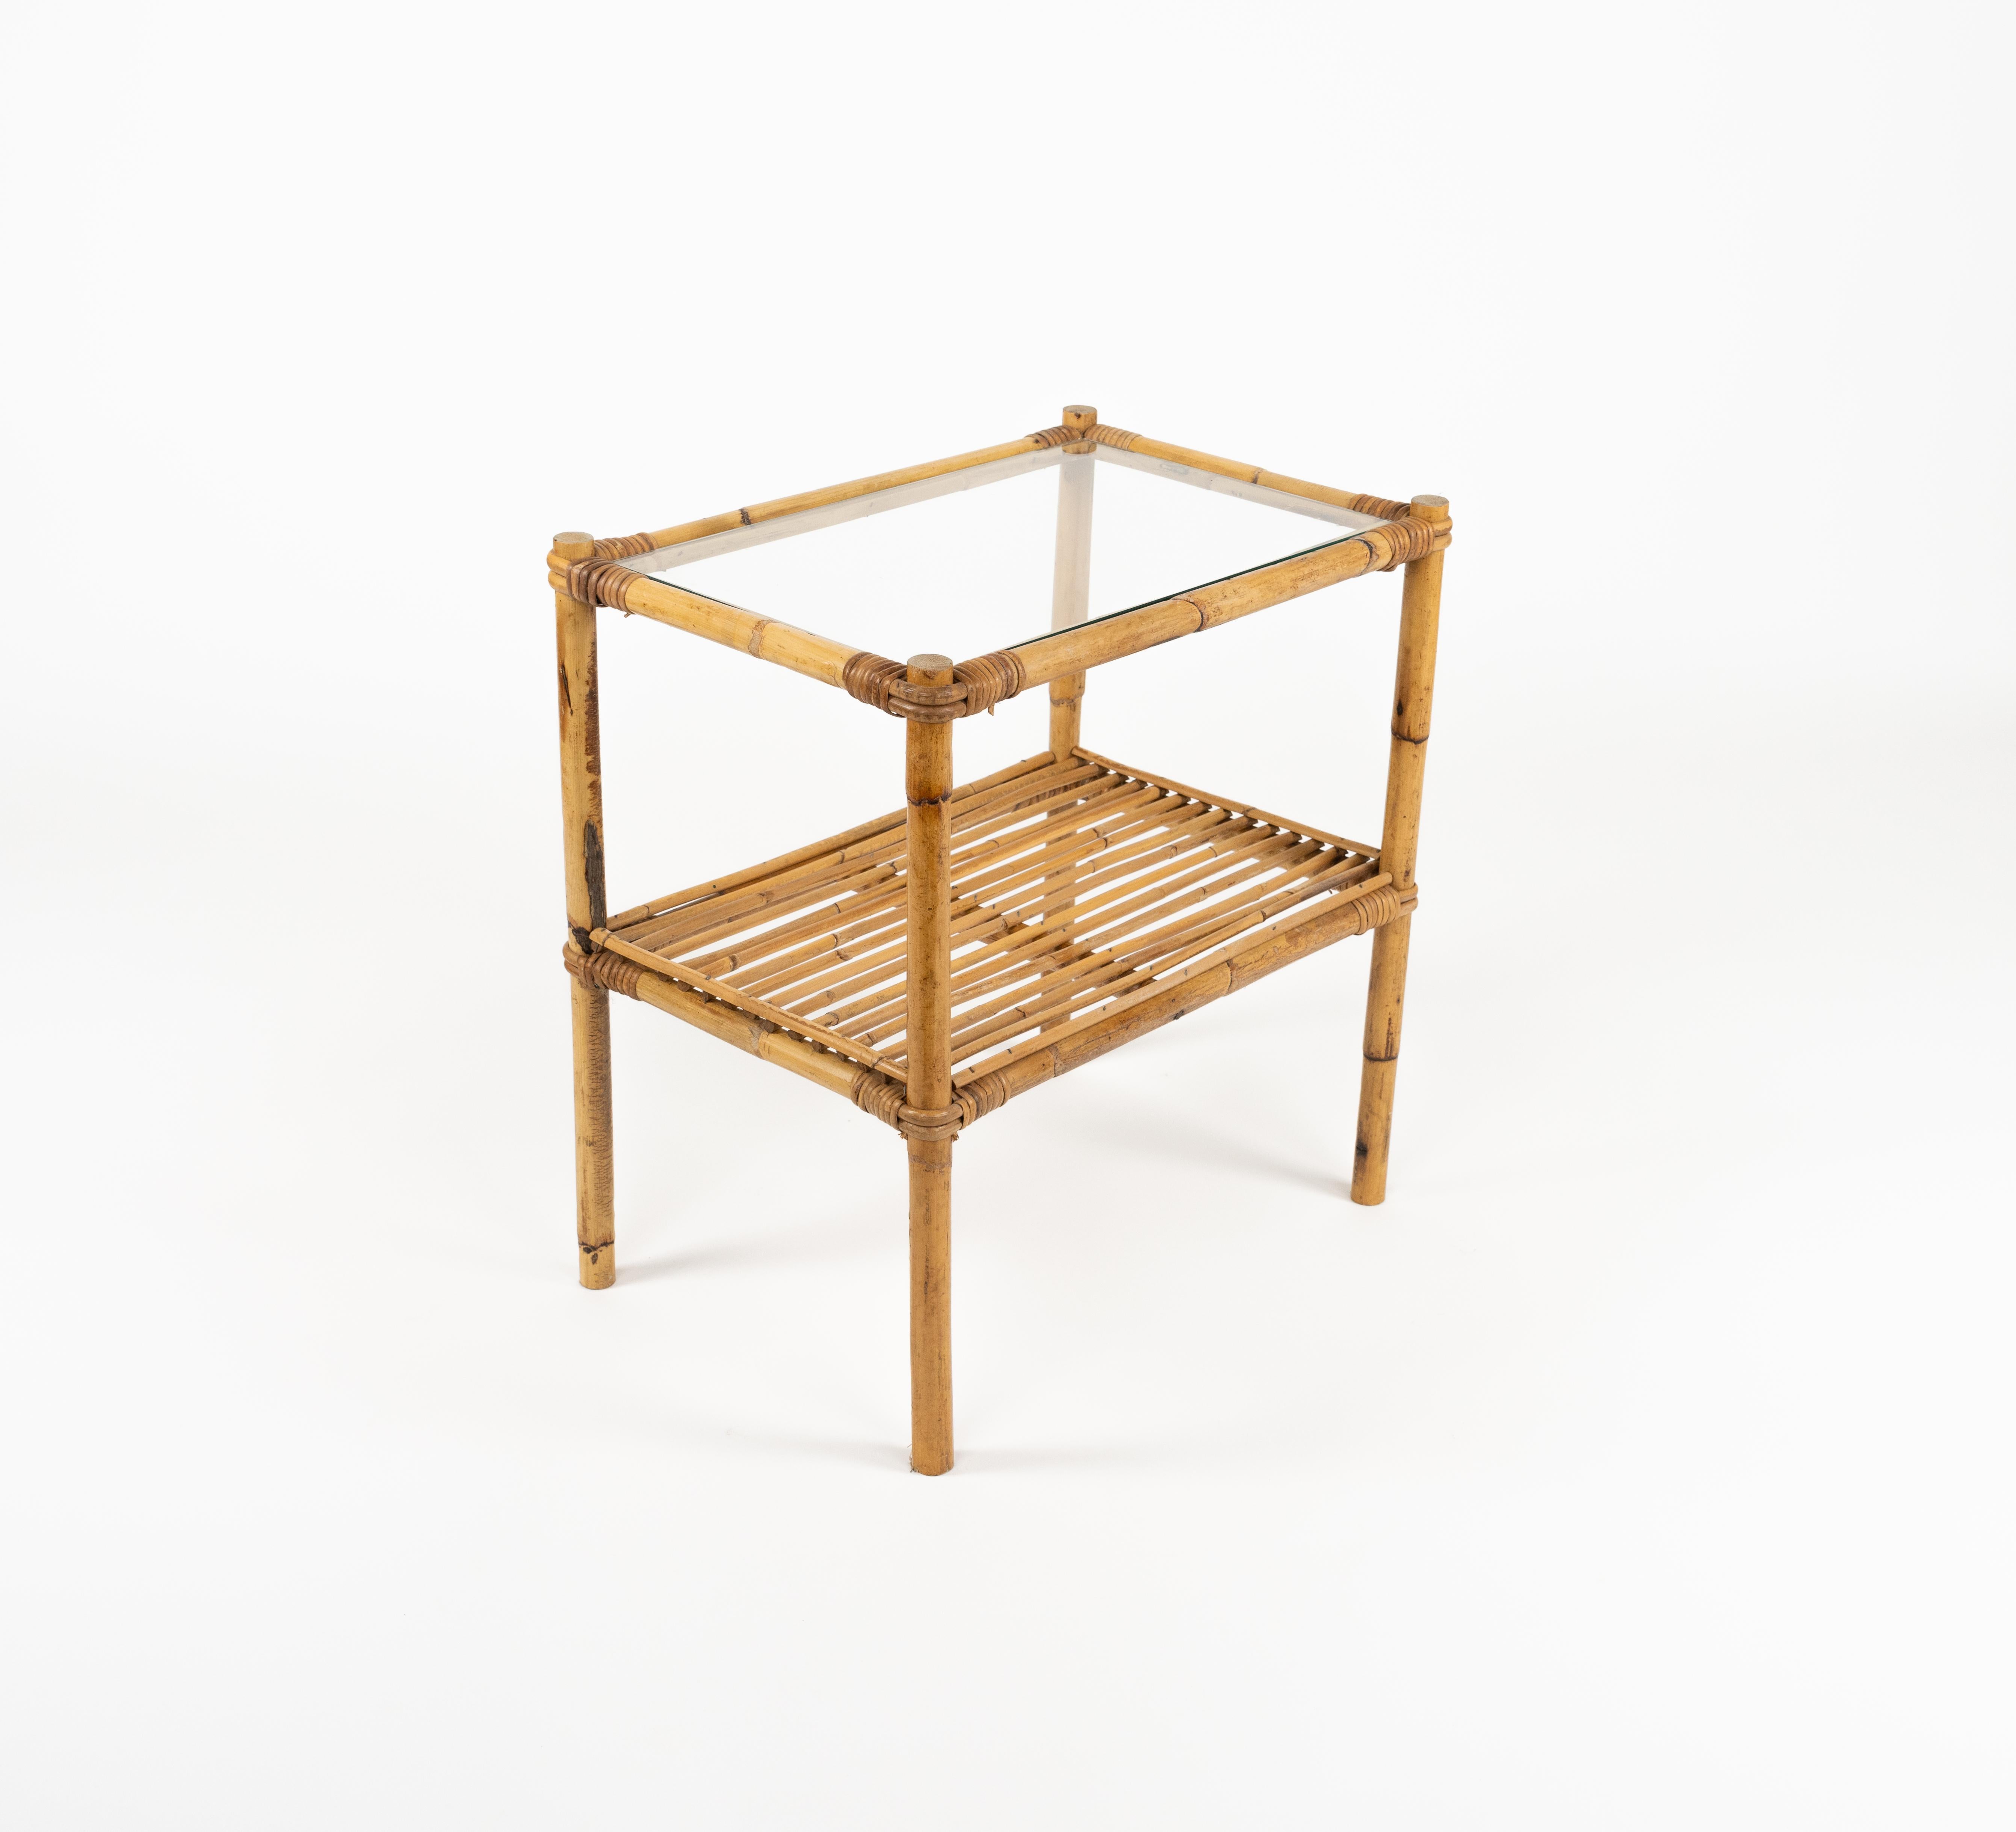 Midcentury Side Table in Bamboo, Rattan and Glass, Italy 1970s For Sale 2